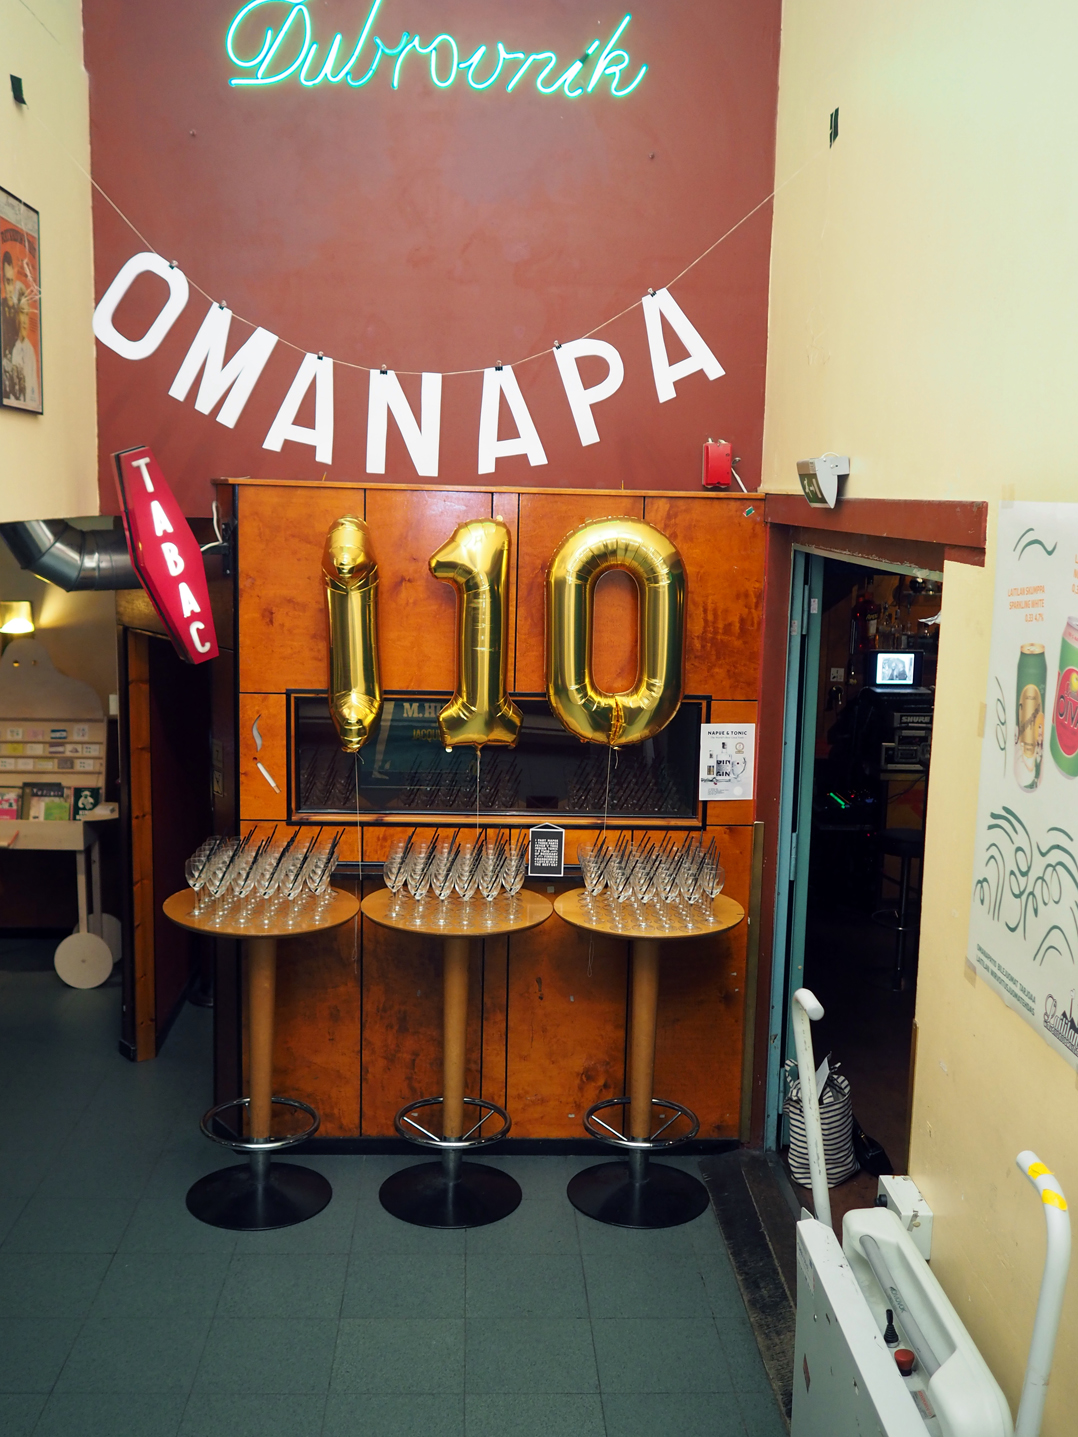 OMANAPA110 Party place was the one & only, legendary Dubrovnik at Eerikinkatu, Helsinki!